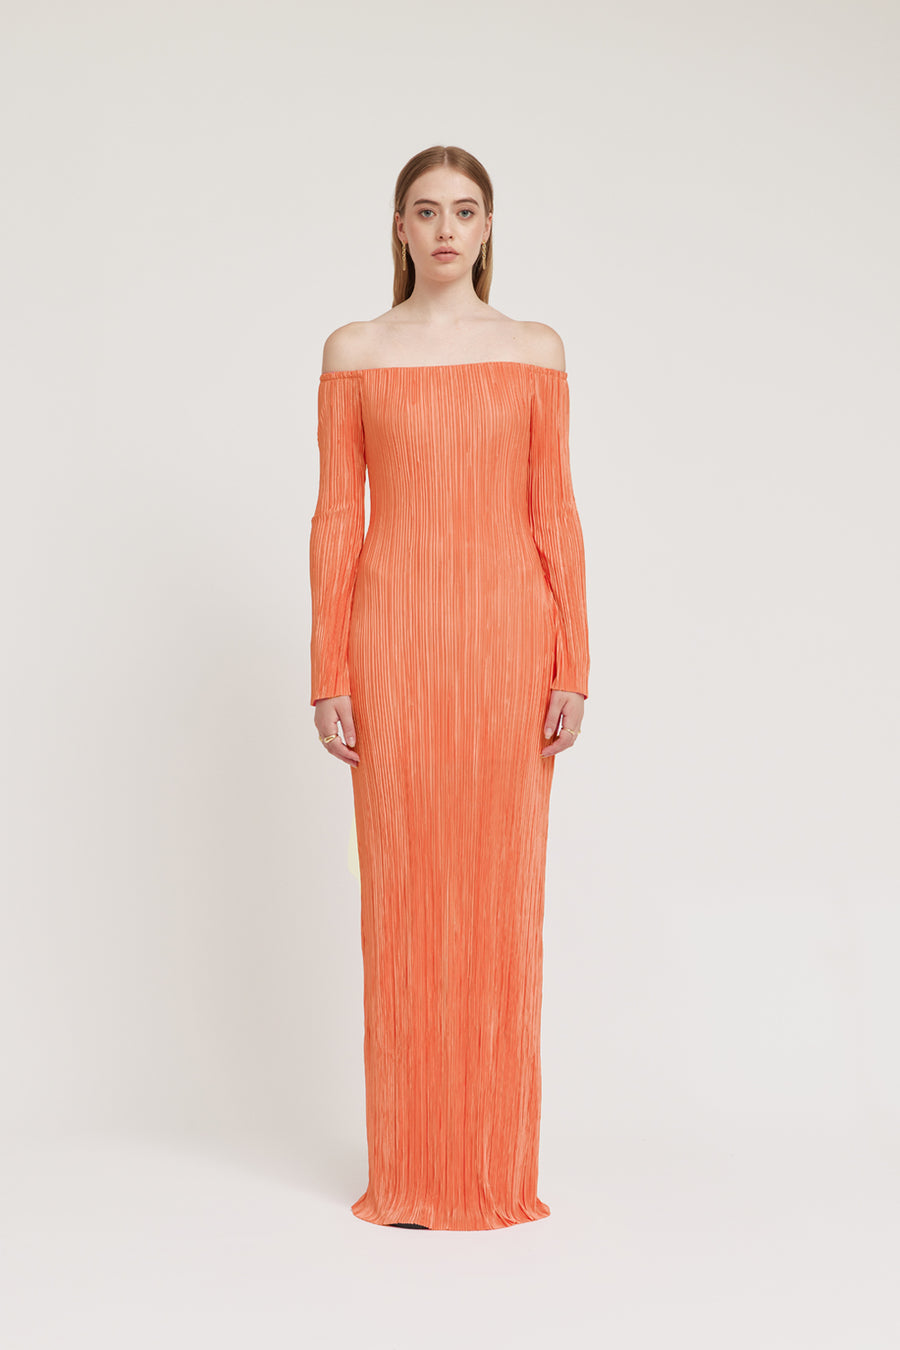 CARRIE DRESS - APRICOT